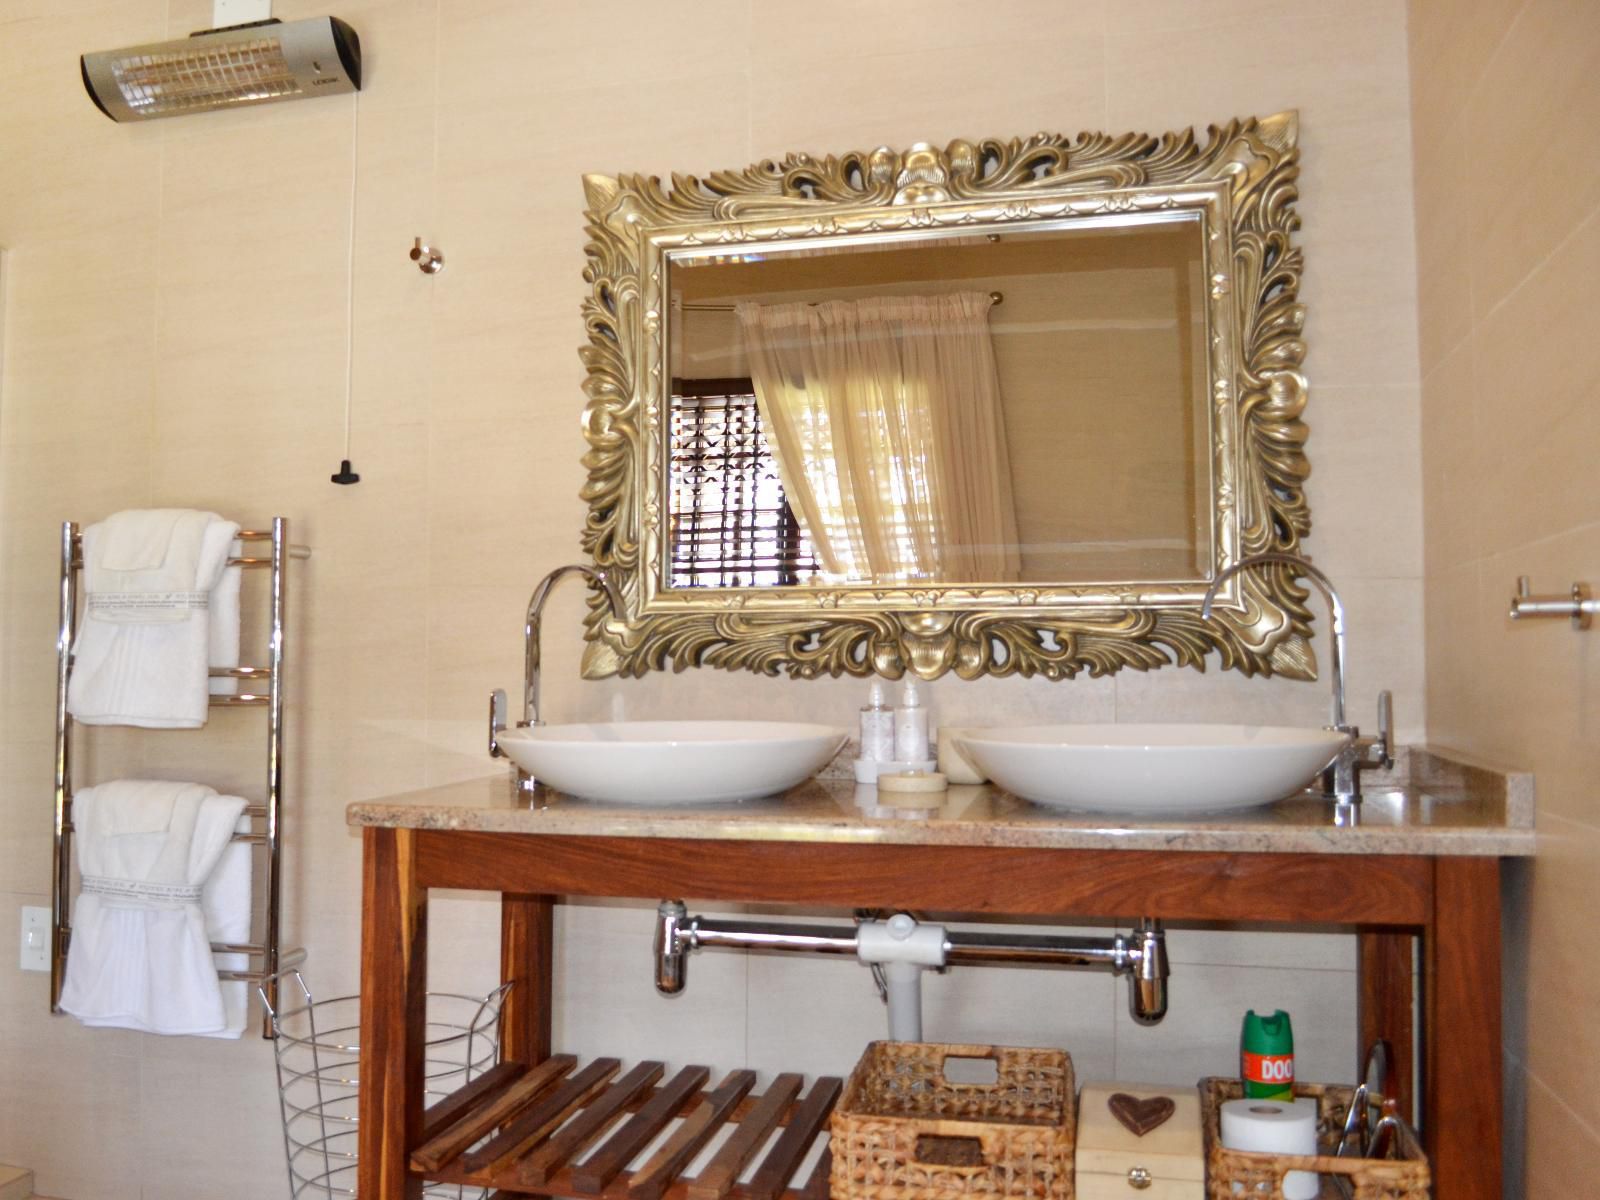 96 On Bree Guesthouse Heilbron Free State South Africa Bathroom